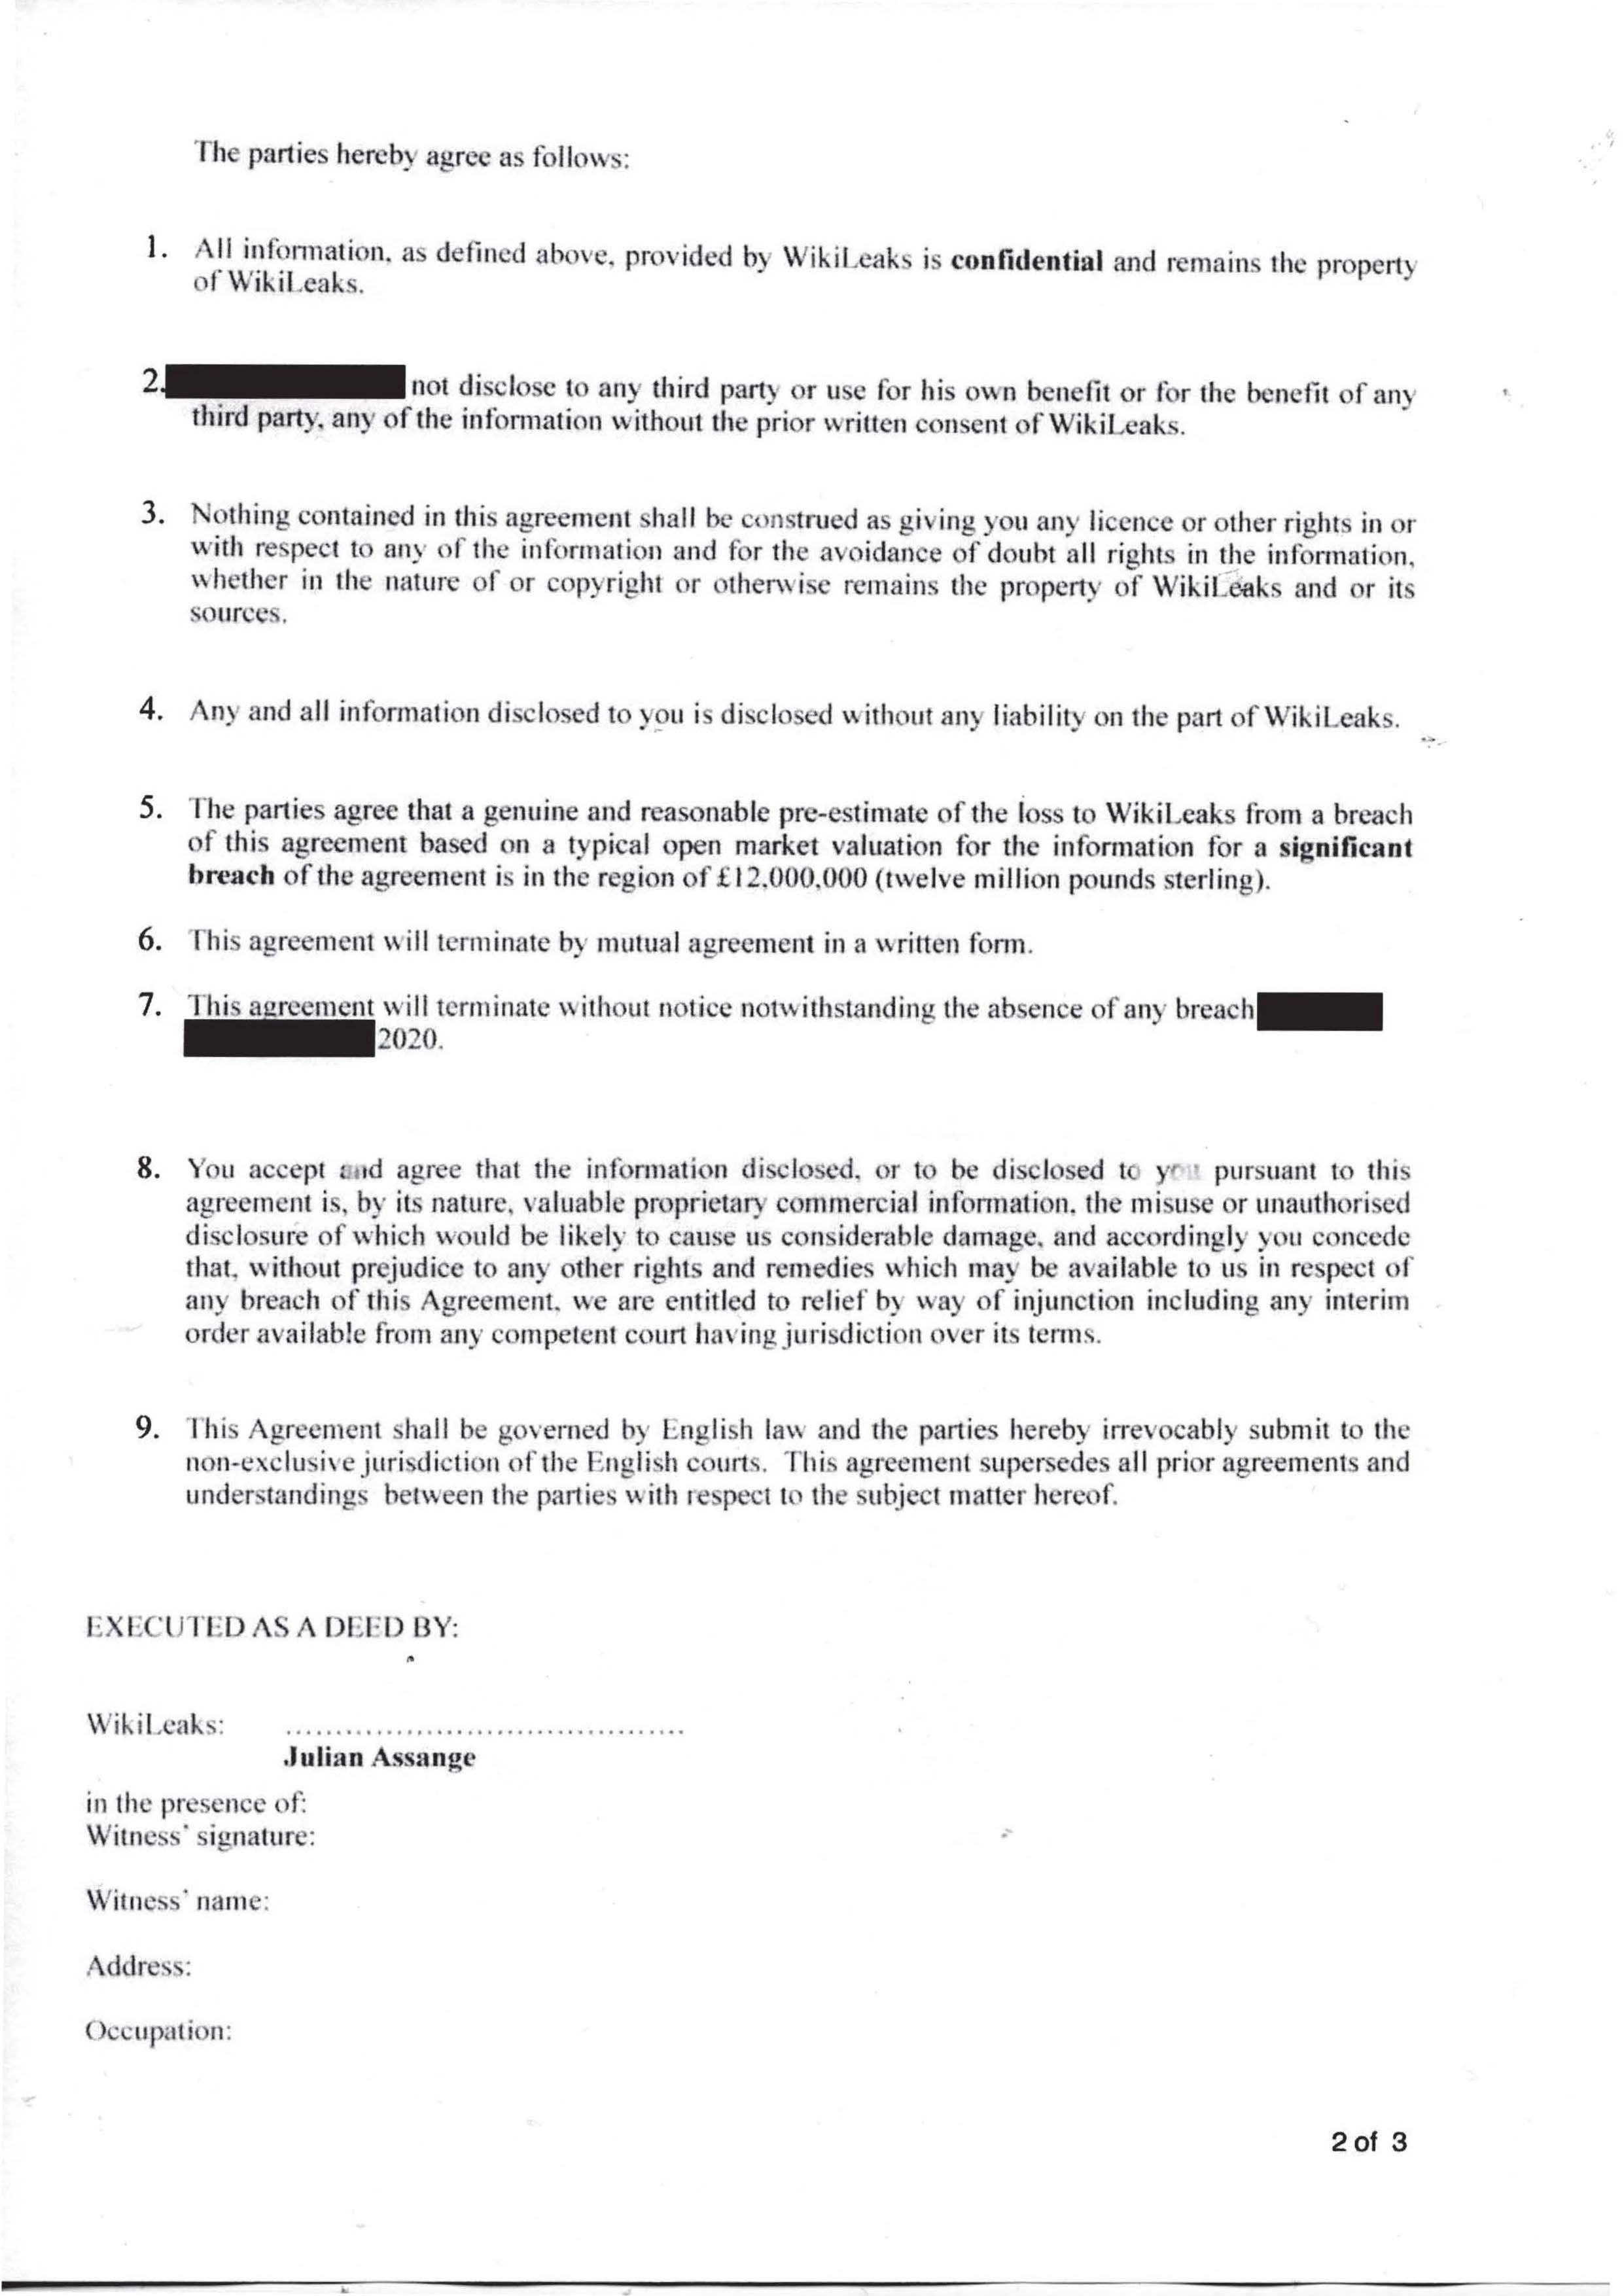 WikiLeaks Confidentiality/Non-Disclosure Agreement 